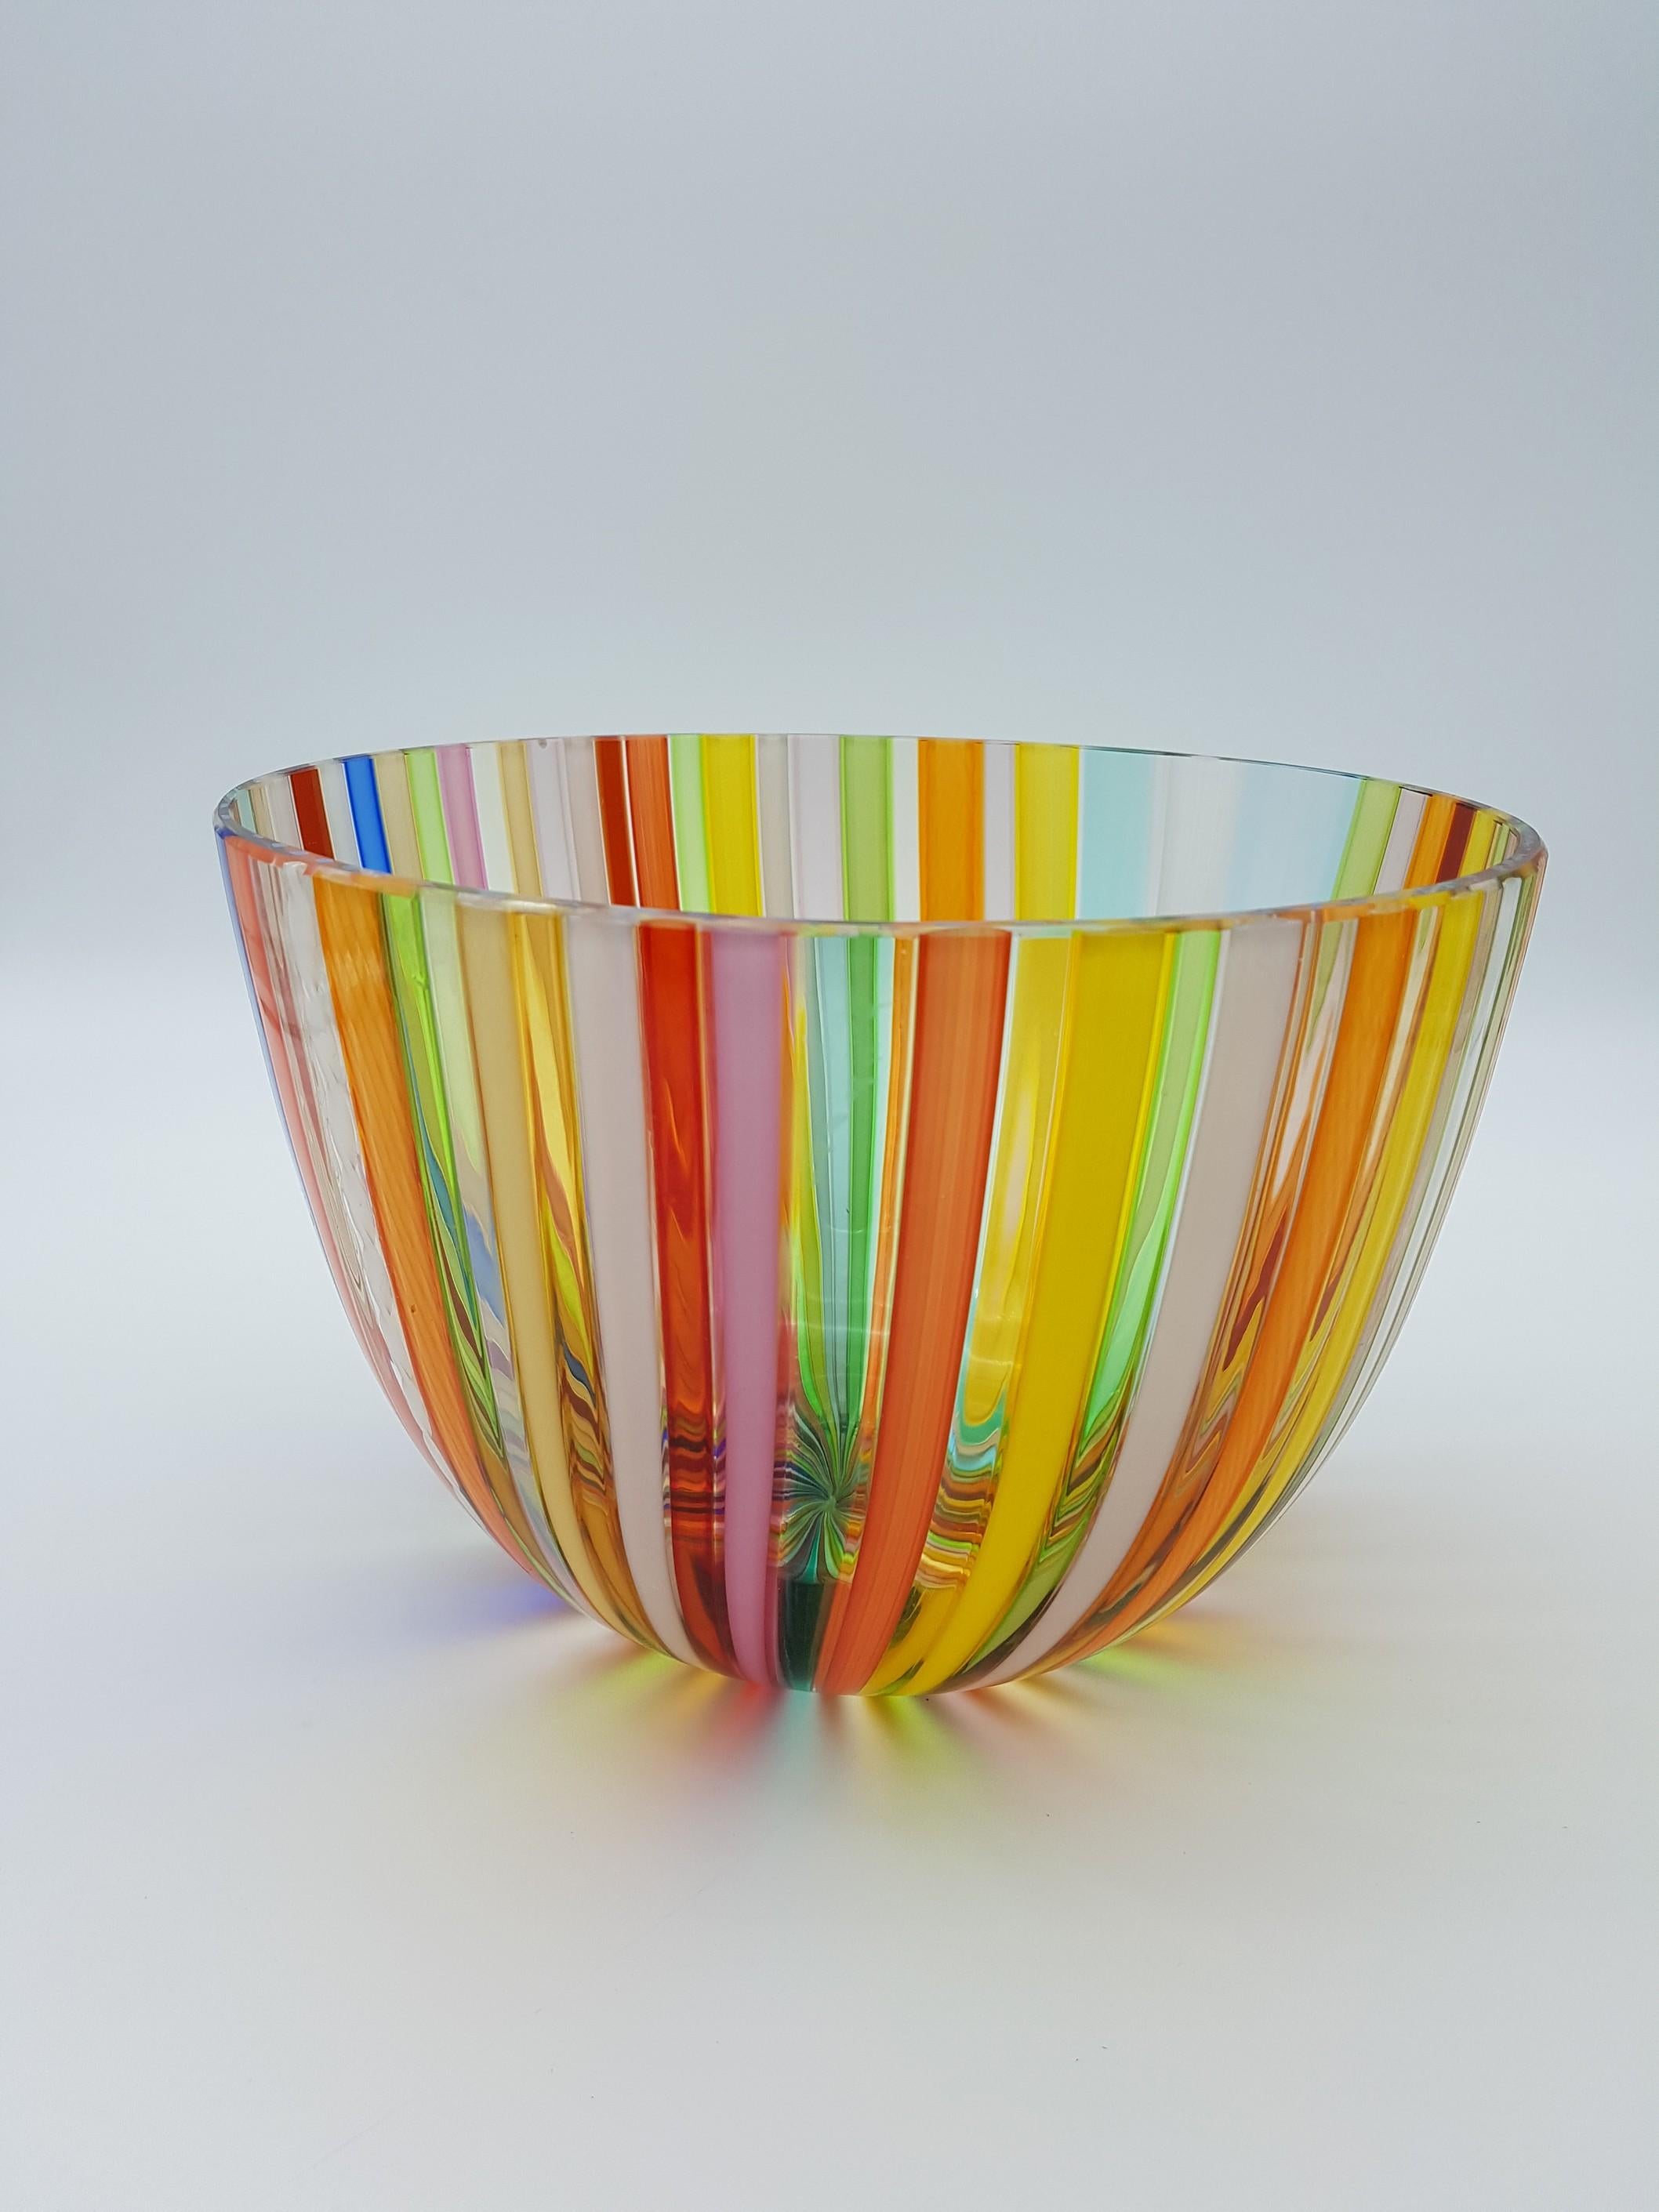 Italian Modern Murano Glass Bowl Centerpiece, Bright Rainbow Colors by Cenedese, 1998 For Sale